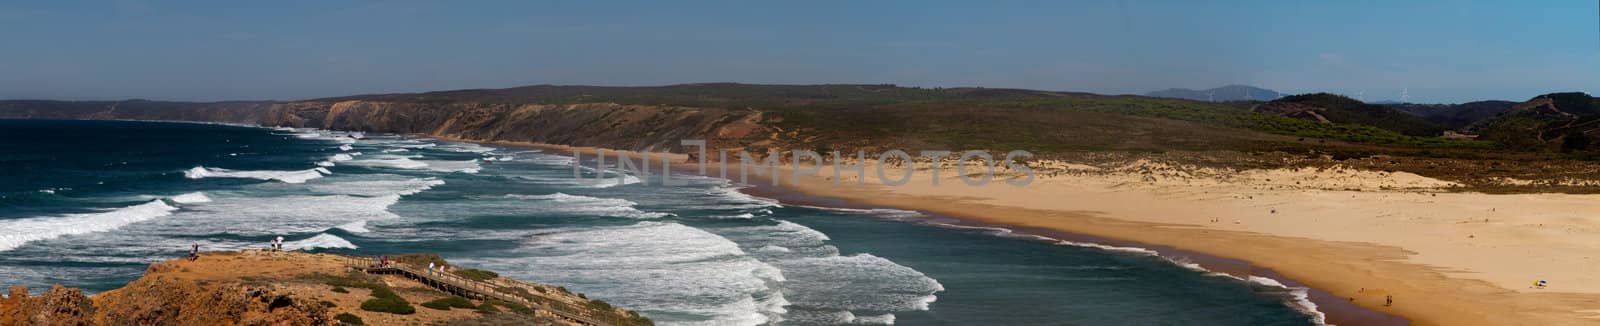 View of a beautiful beach in Sagres nearby region on the Algarve, Portugal.